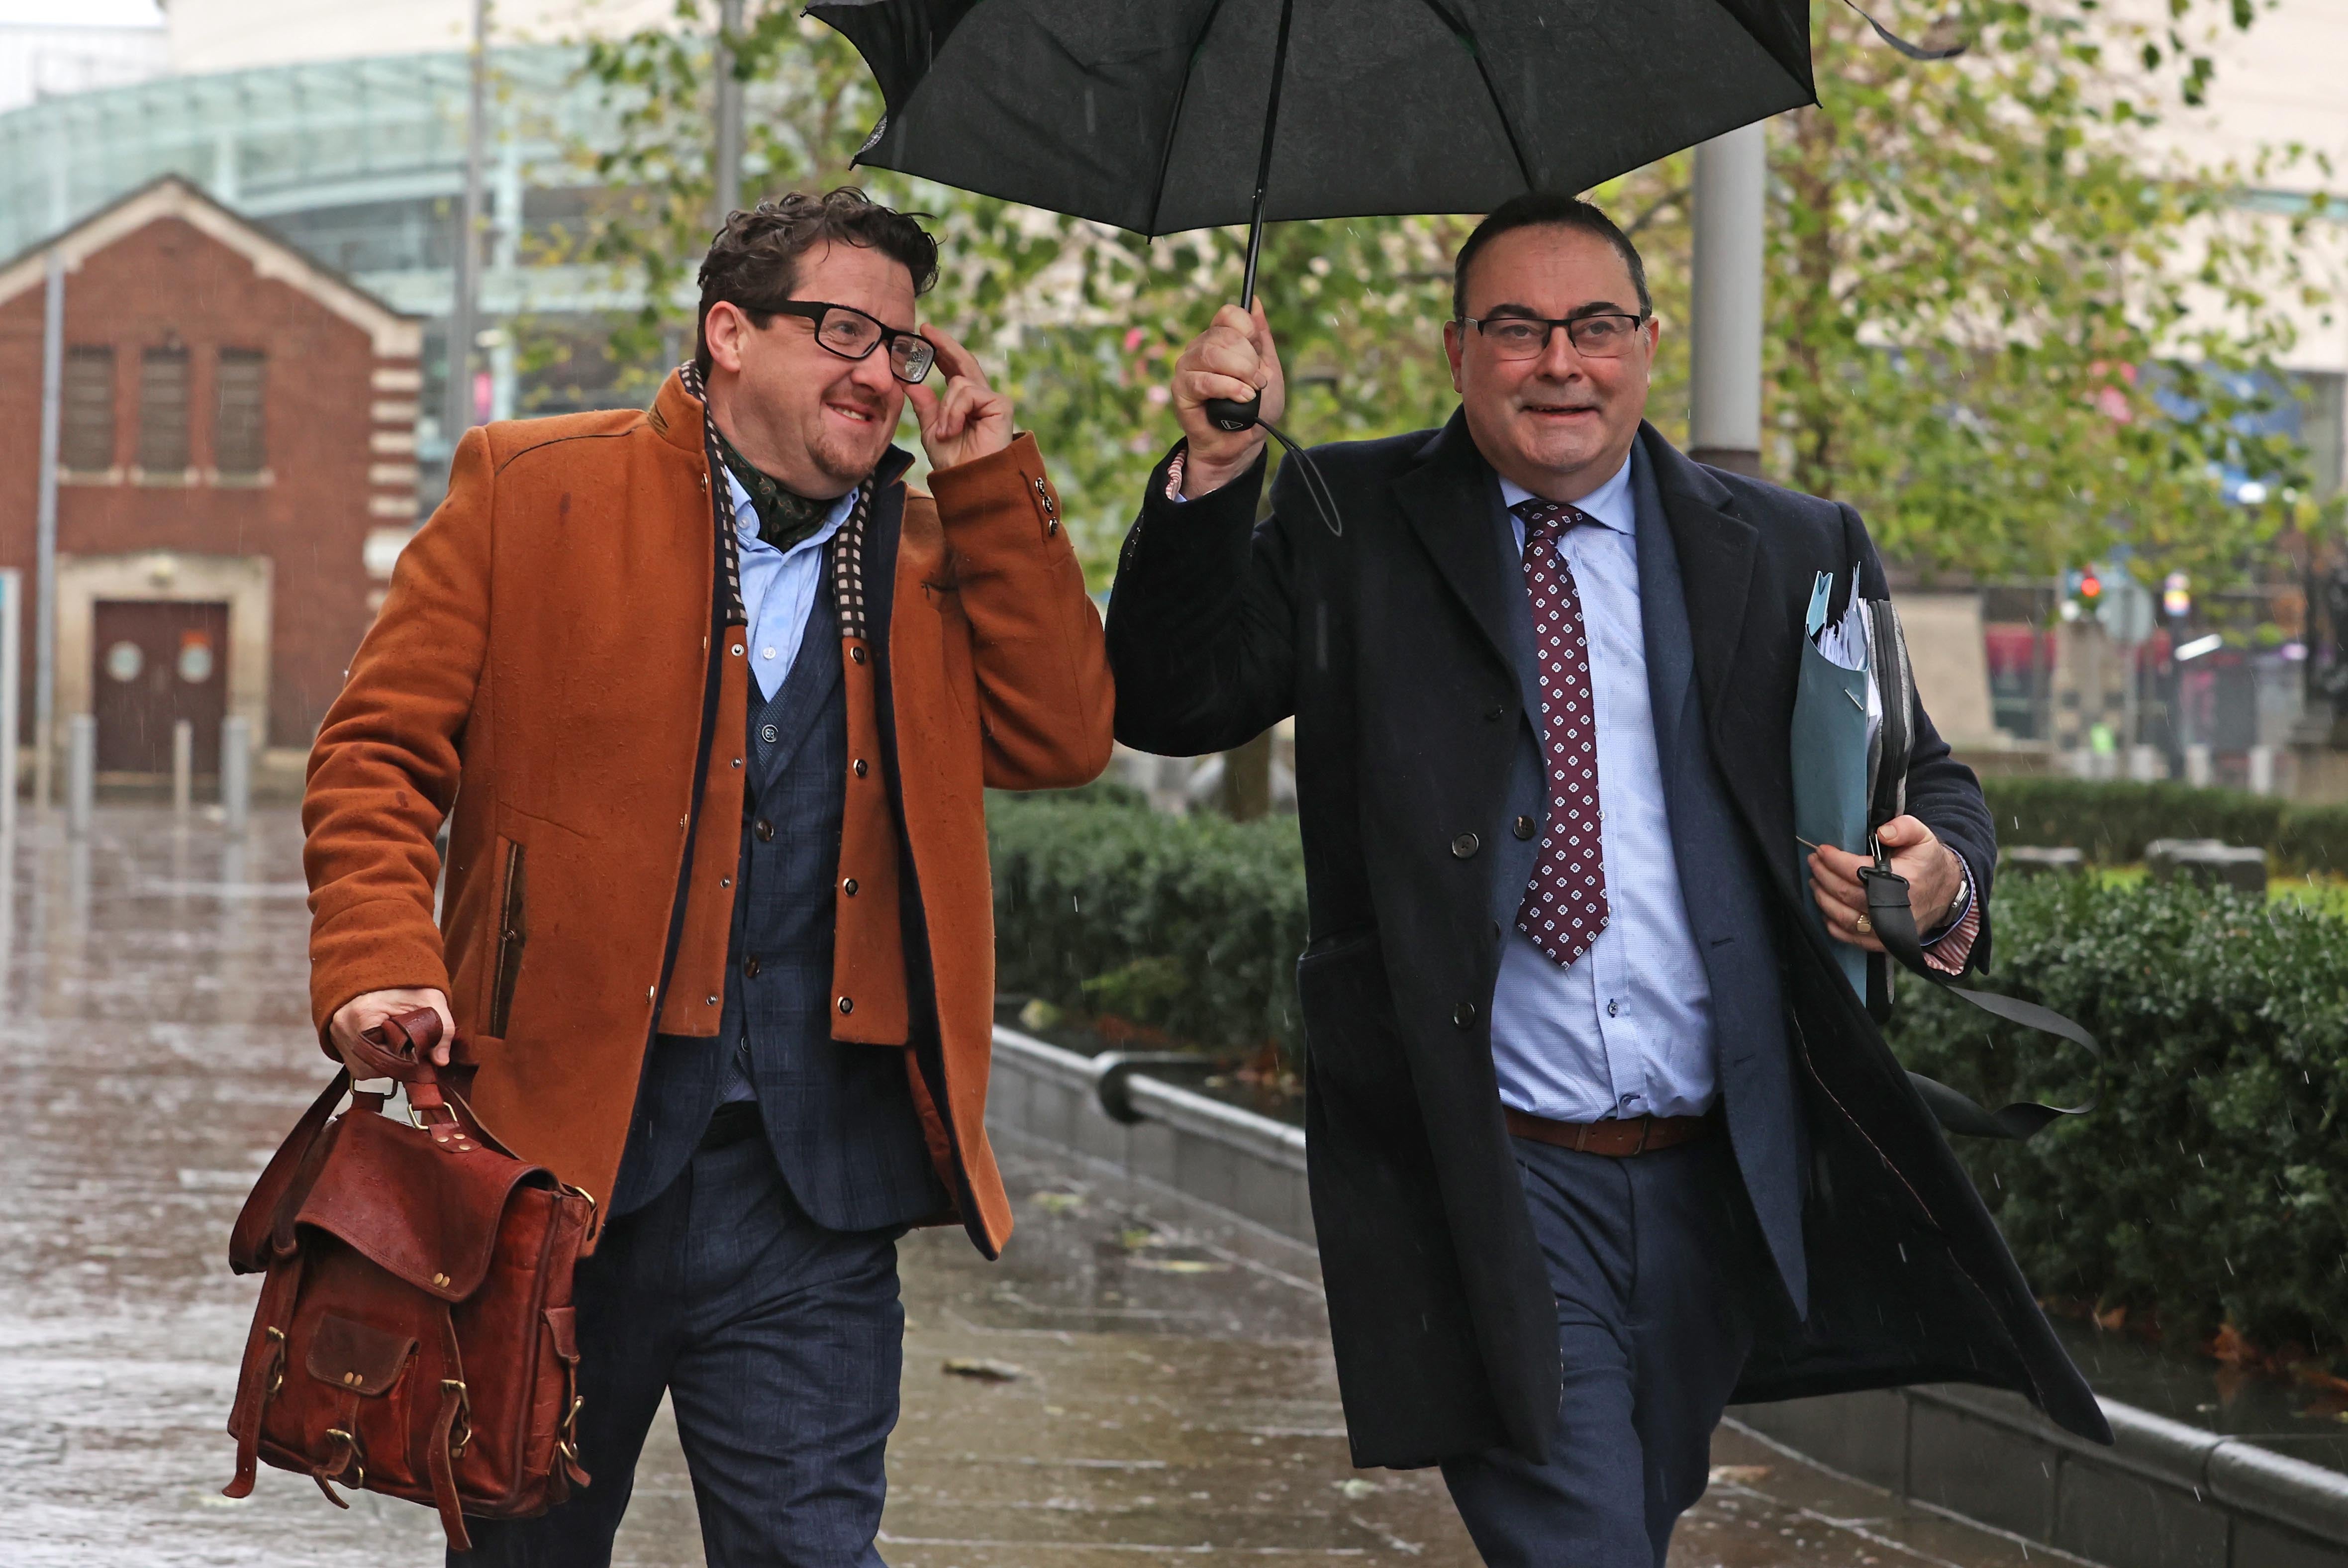 Sean Napier (left) and his solicitor Paul Farrell arrive at the Royal Courts of Justice in Belfast (Liam McBurney/PA)